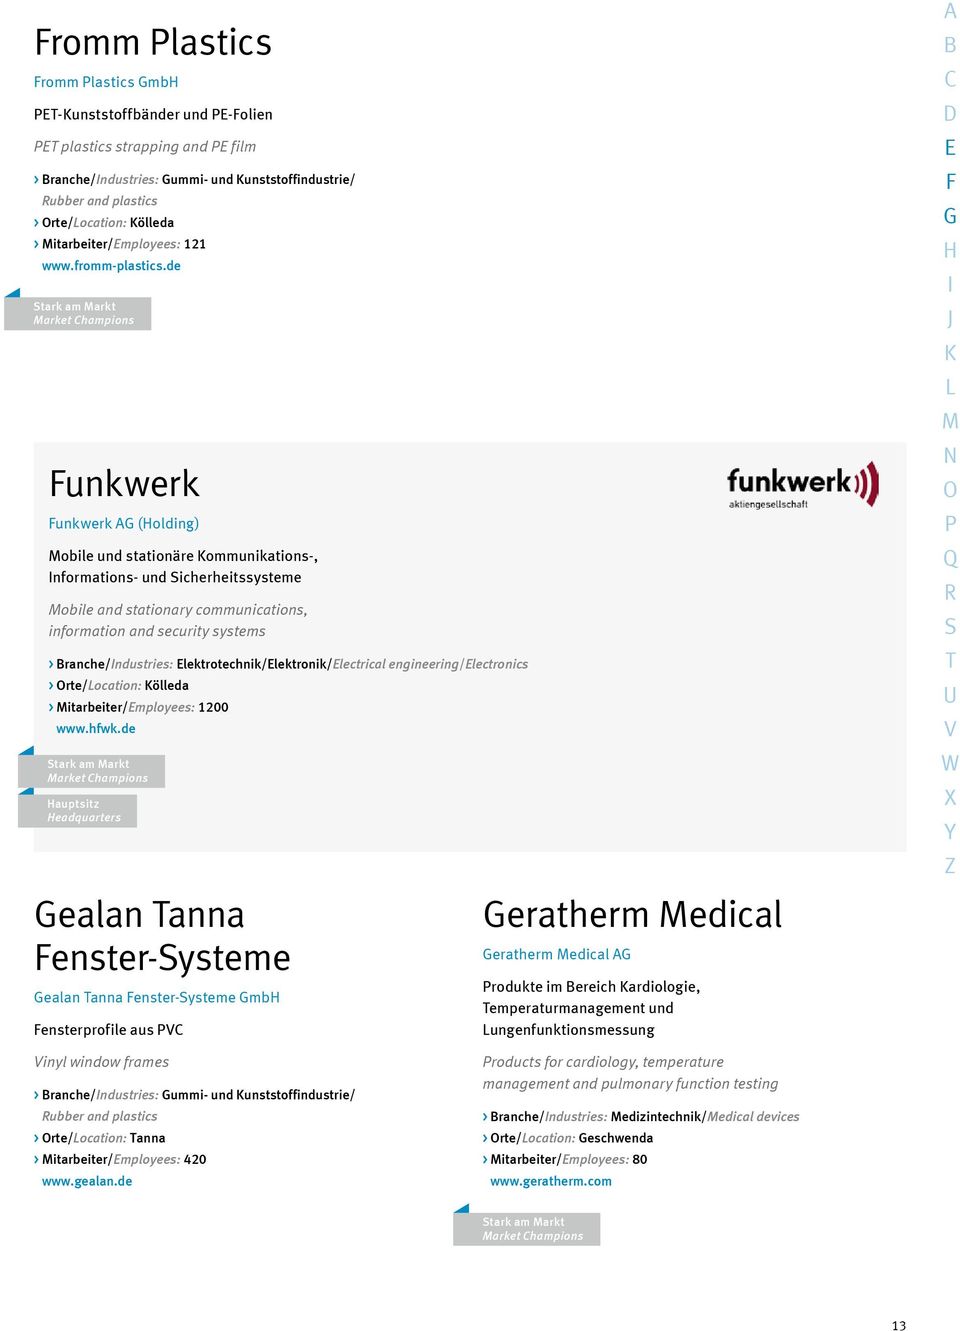 de Funkwerk Funkwerk AG (Holding) Mobile und stationäre Kommunikations-, Informations- und Sicherheitssysteme Mobile and stationary communications, information and security systems >